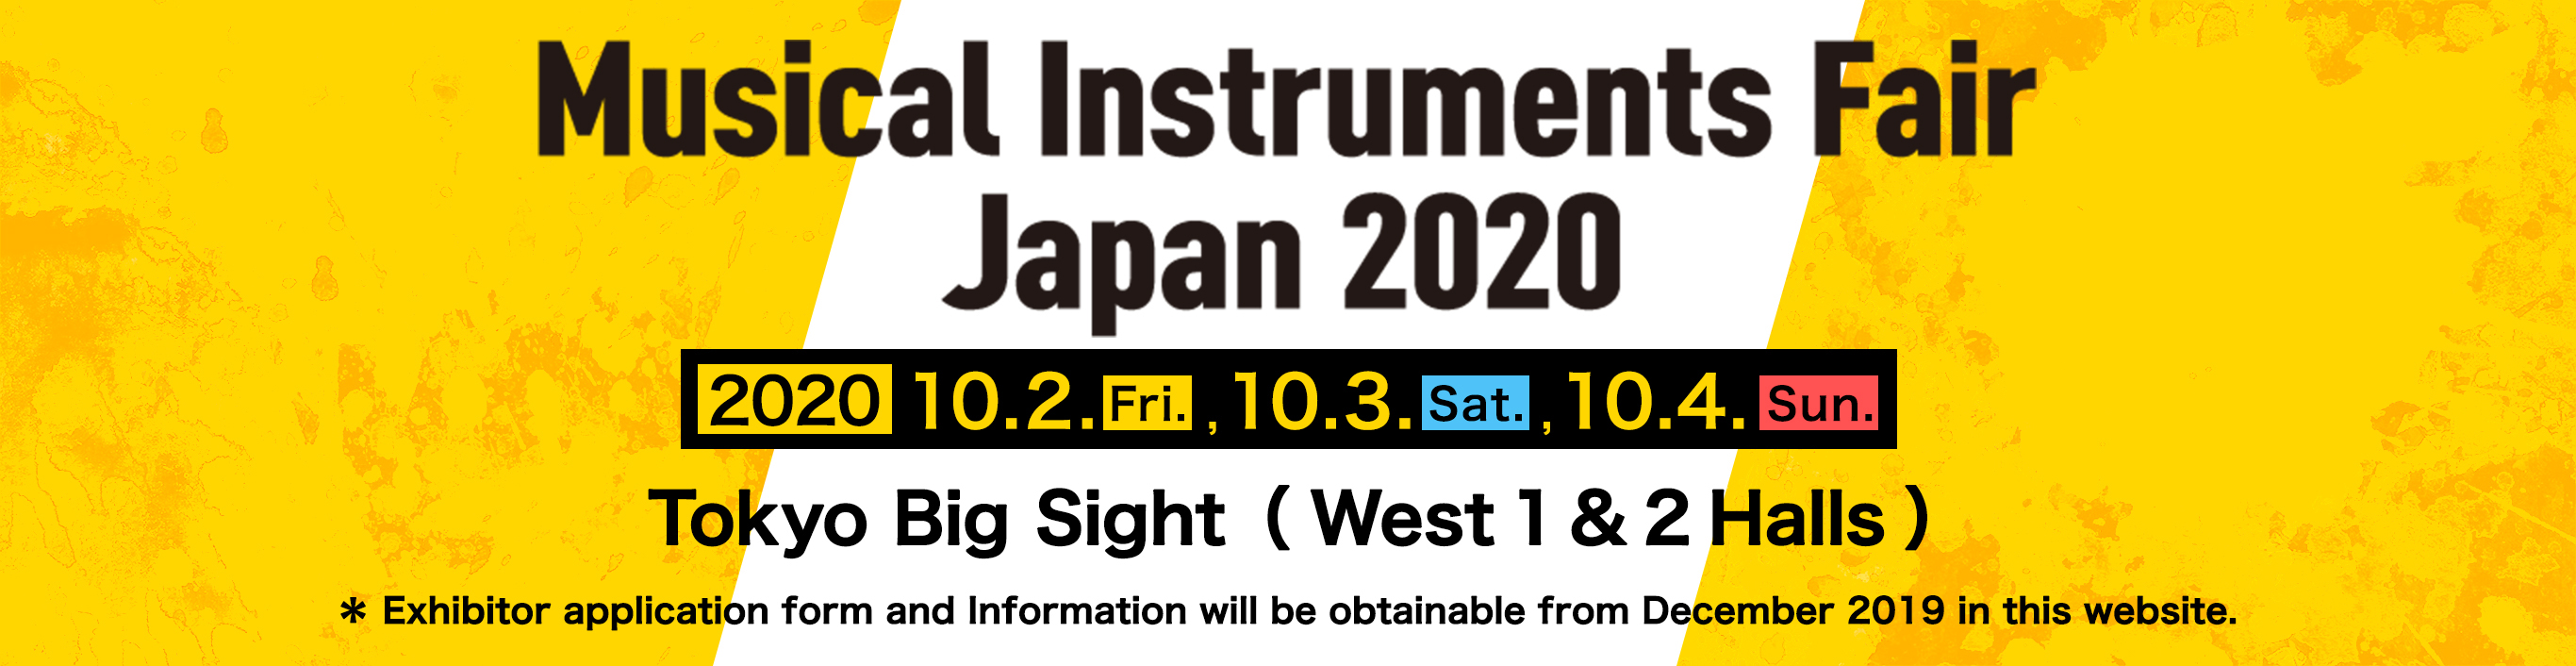 MUSICAL INSTRUMENTS FAIR JAPAN 2020 Date: October 2(Fri.), 3(Sat), 4(Sun.)Venue: Tokyo Big Sight (West 1 & 2 Halls)＊ Exhibitor application form and Information will be obtainable from December 2019 in this website.